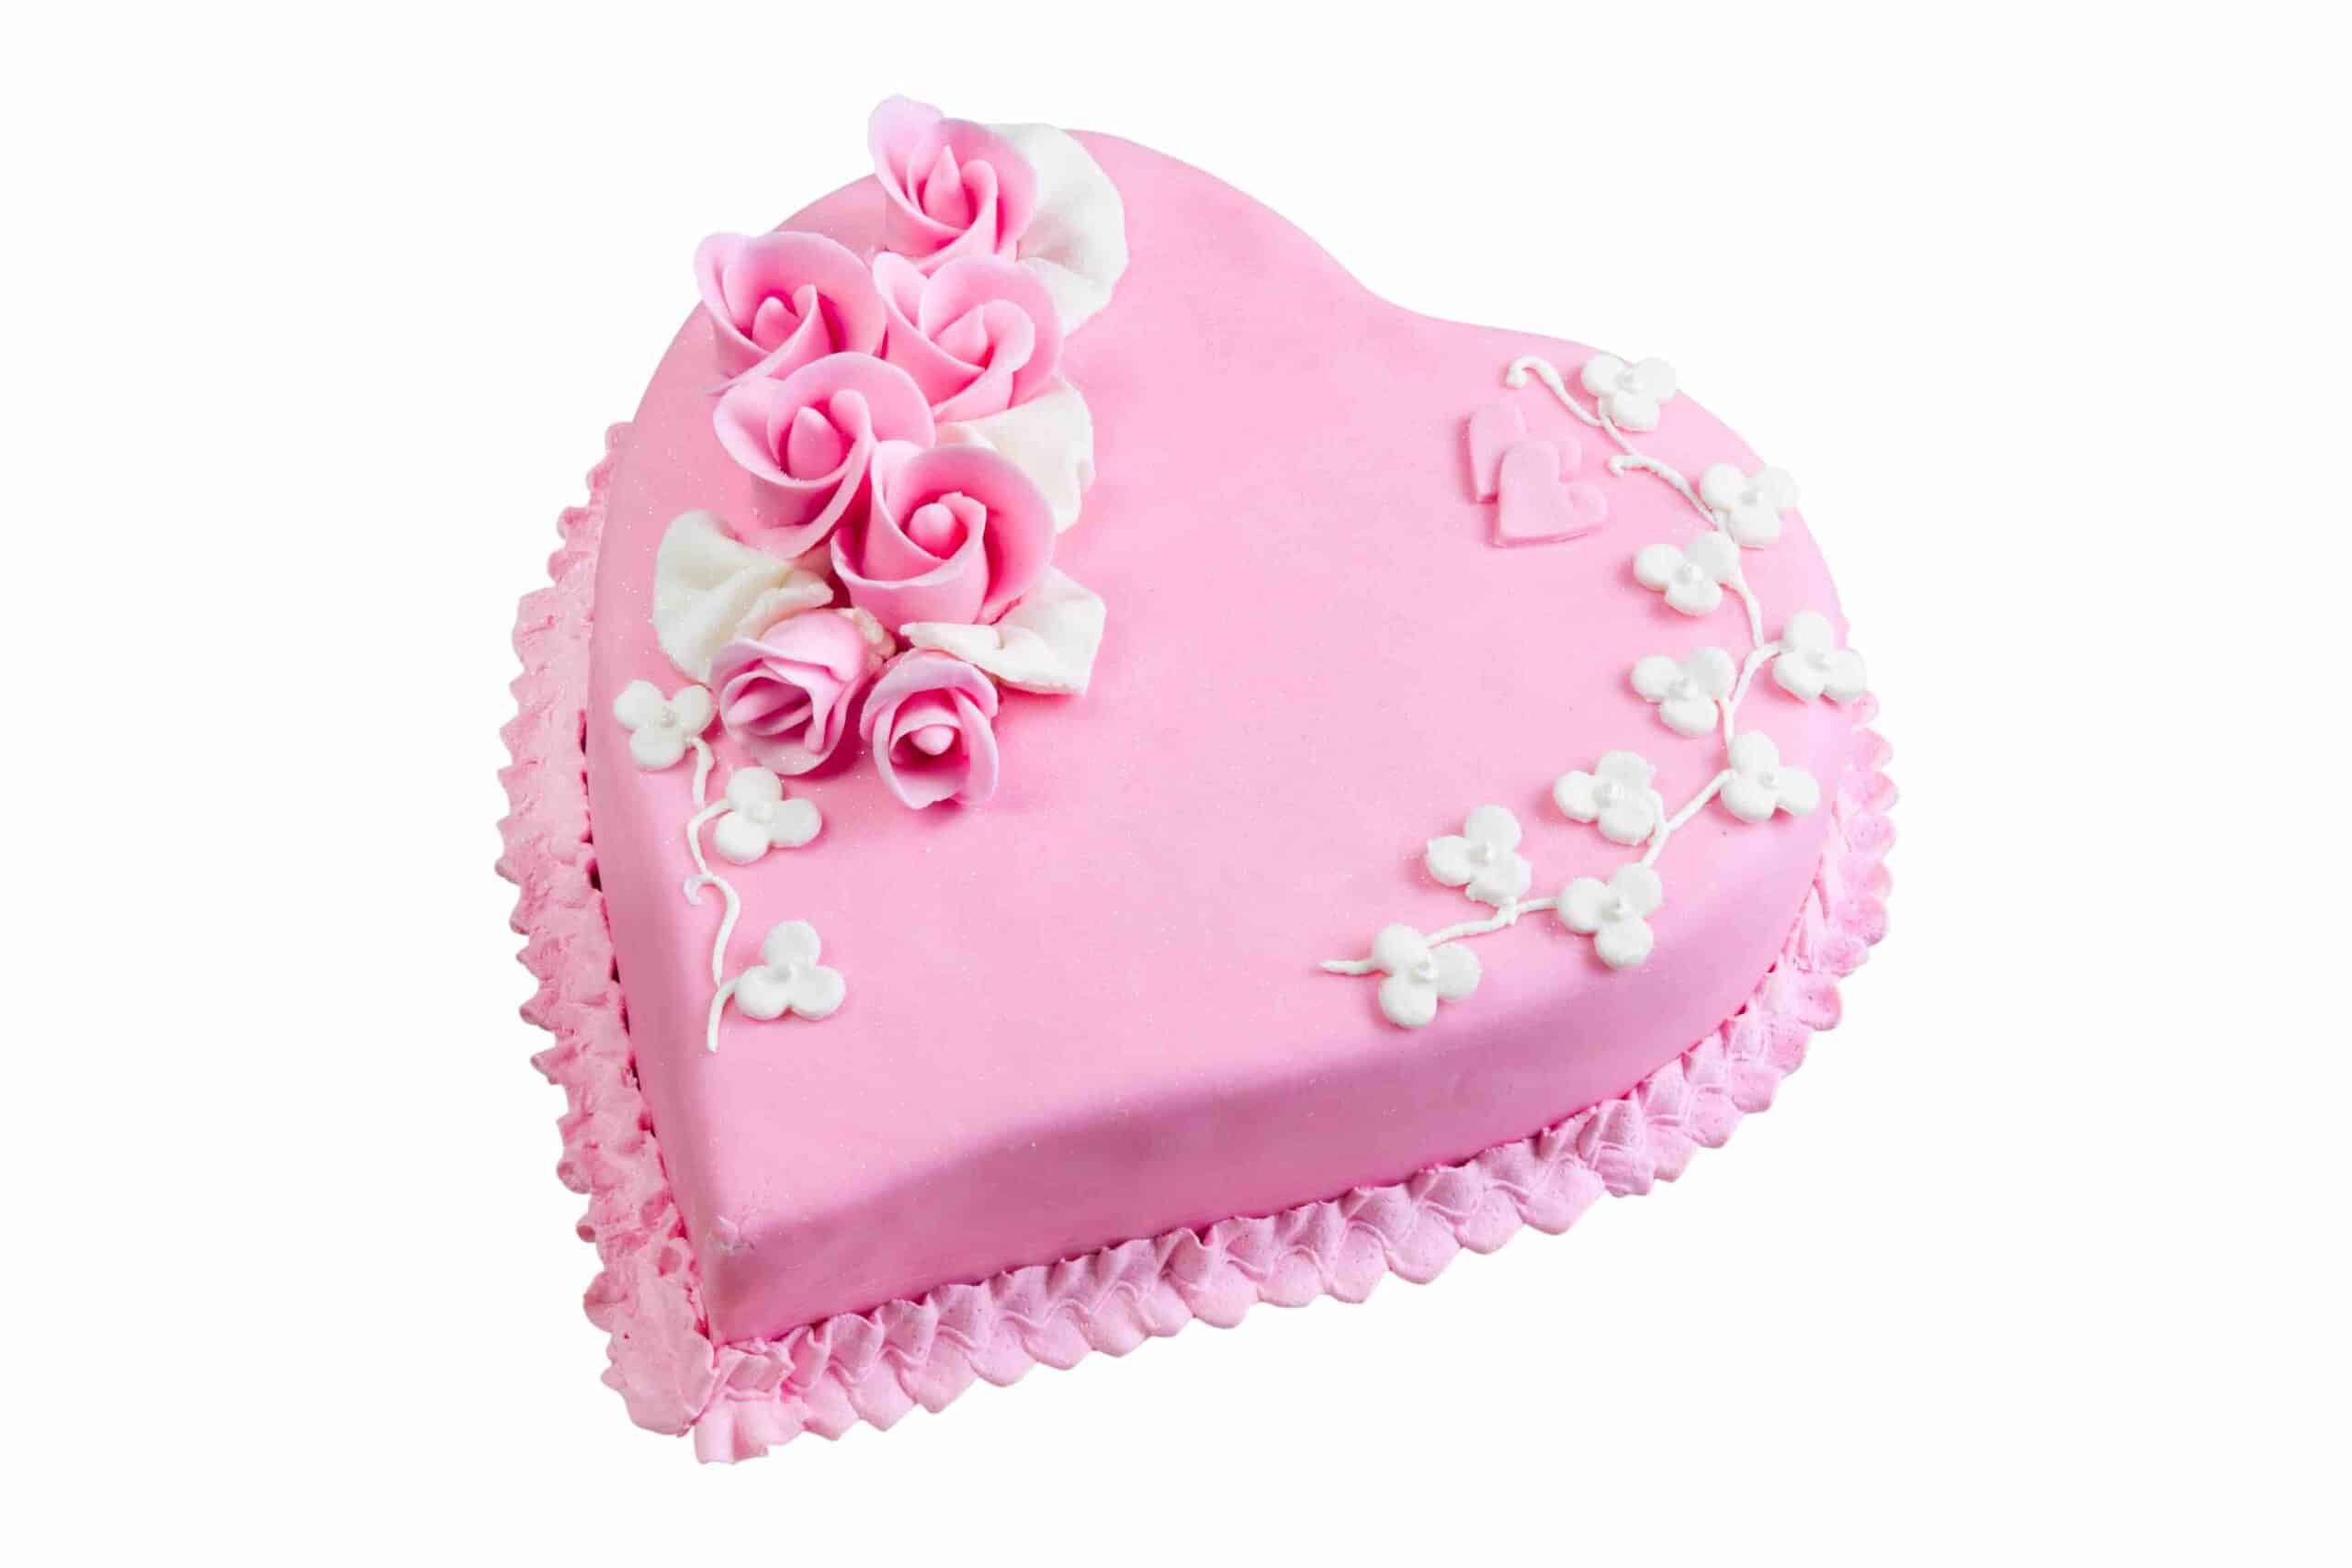 pink cake heart, for Valentines, Birthdays, isolated